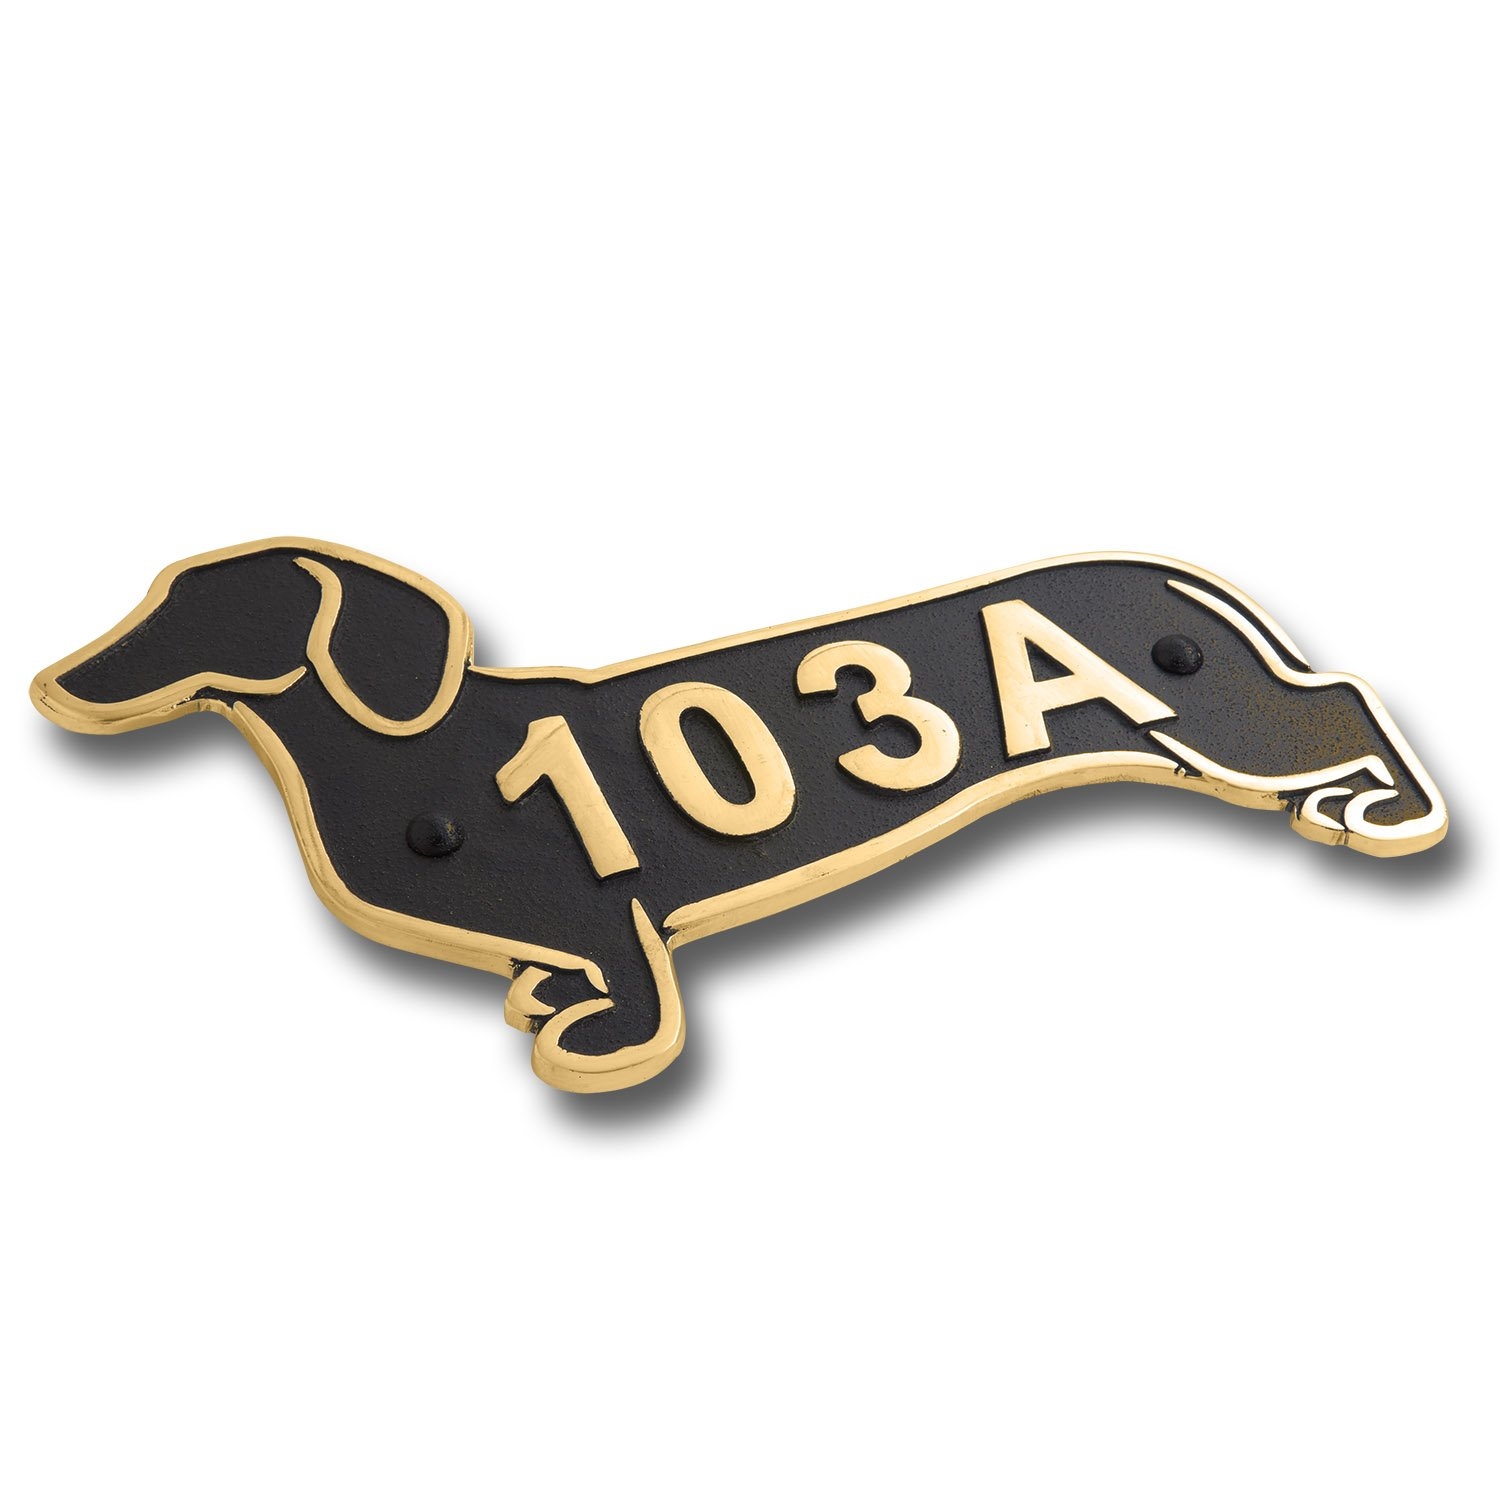 Dachshund Metal House Number Address Plaque. Sausage Dog Gift Idea For A Dachshund Owner. Yard Or Garden Dachshund Décor Makes A Great Gift For Him Or Her – Brass & Grey